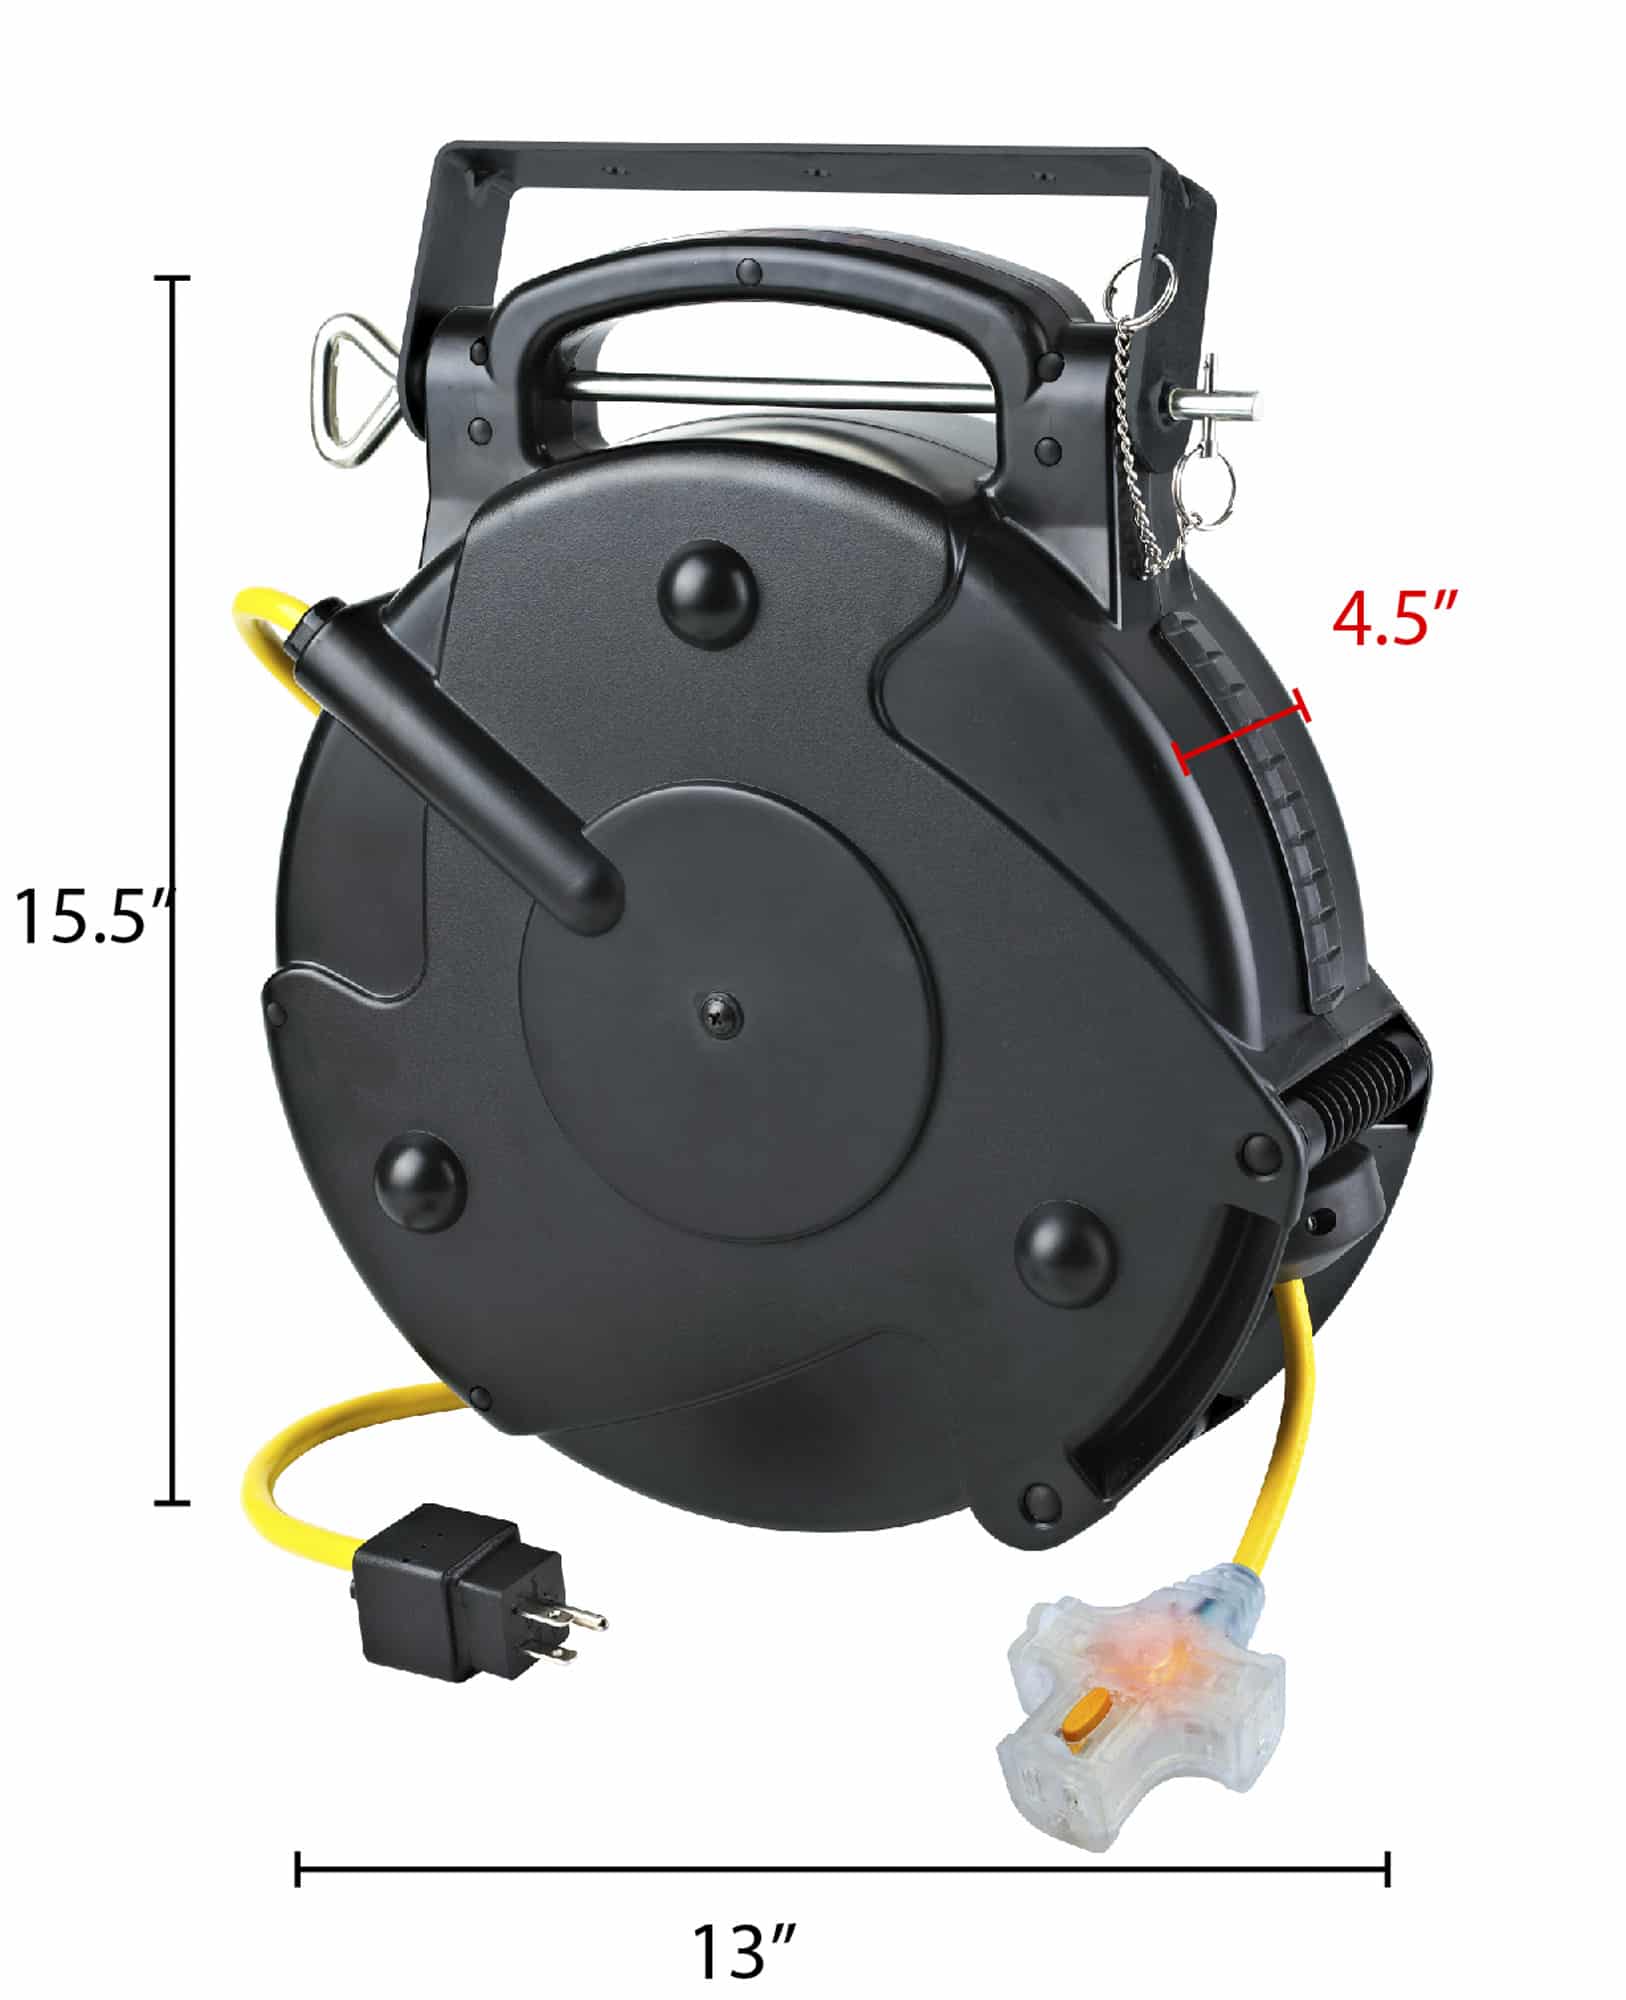 Alert Stamping 30ft Retractable Extension Cord Reel With Circuit